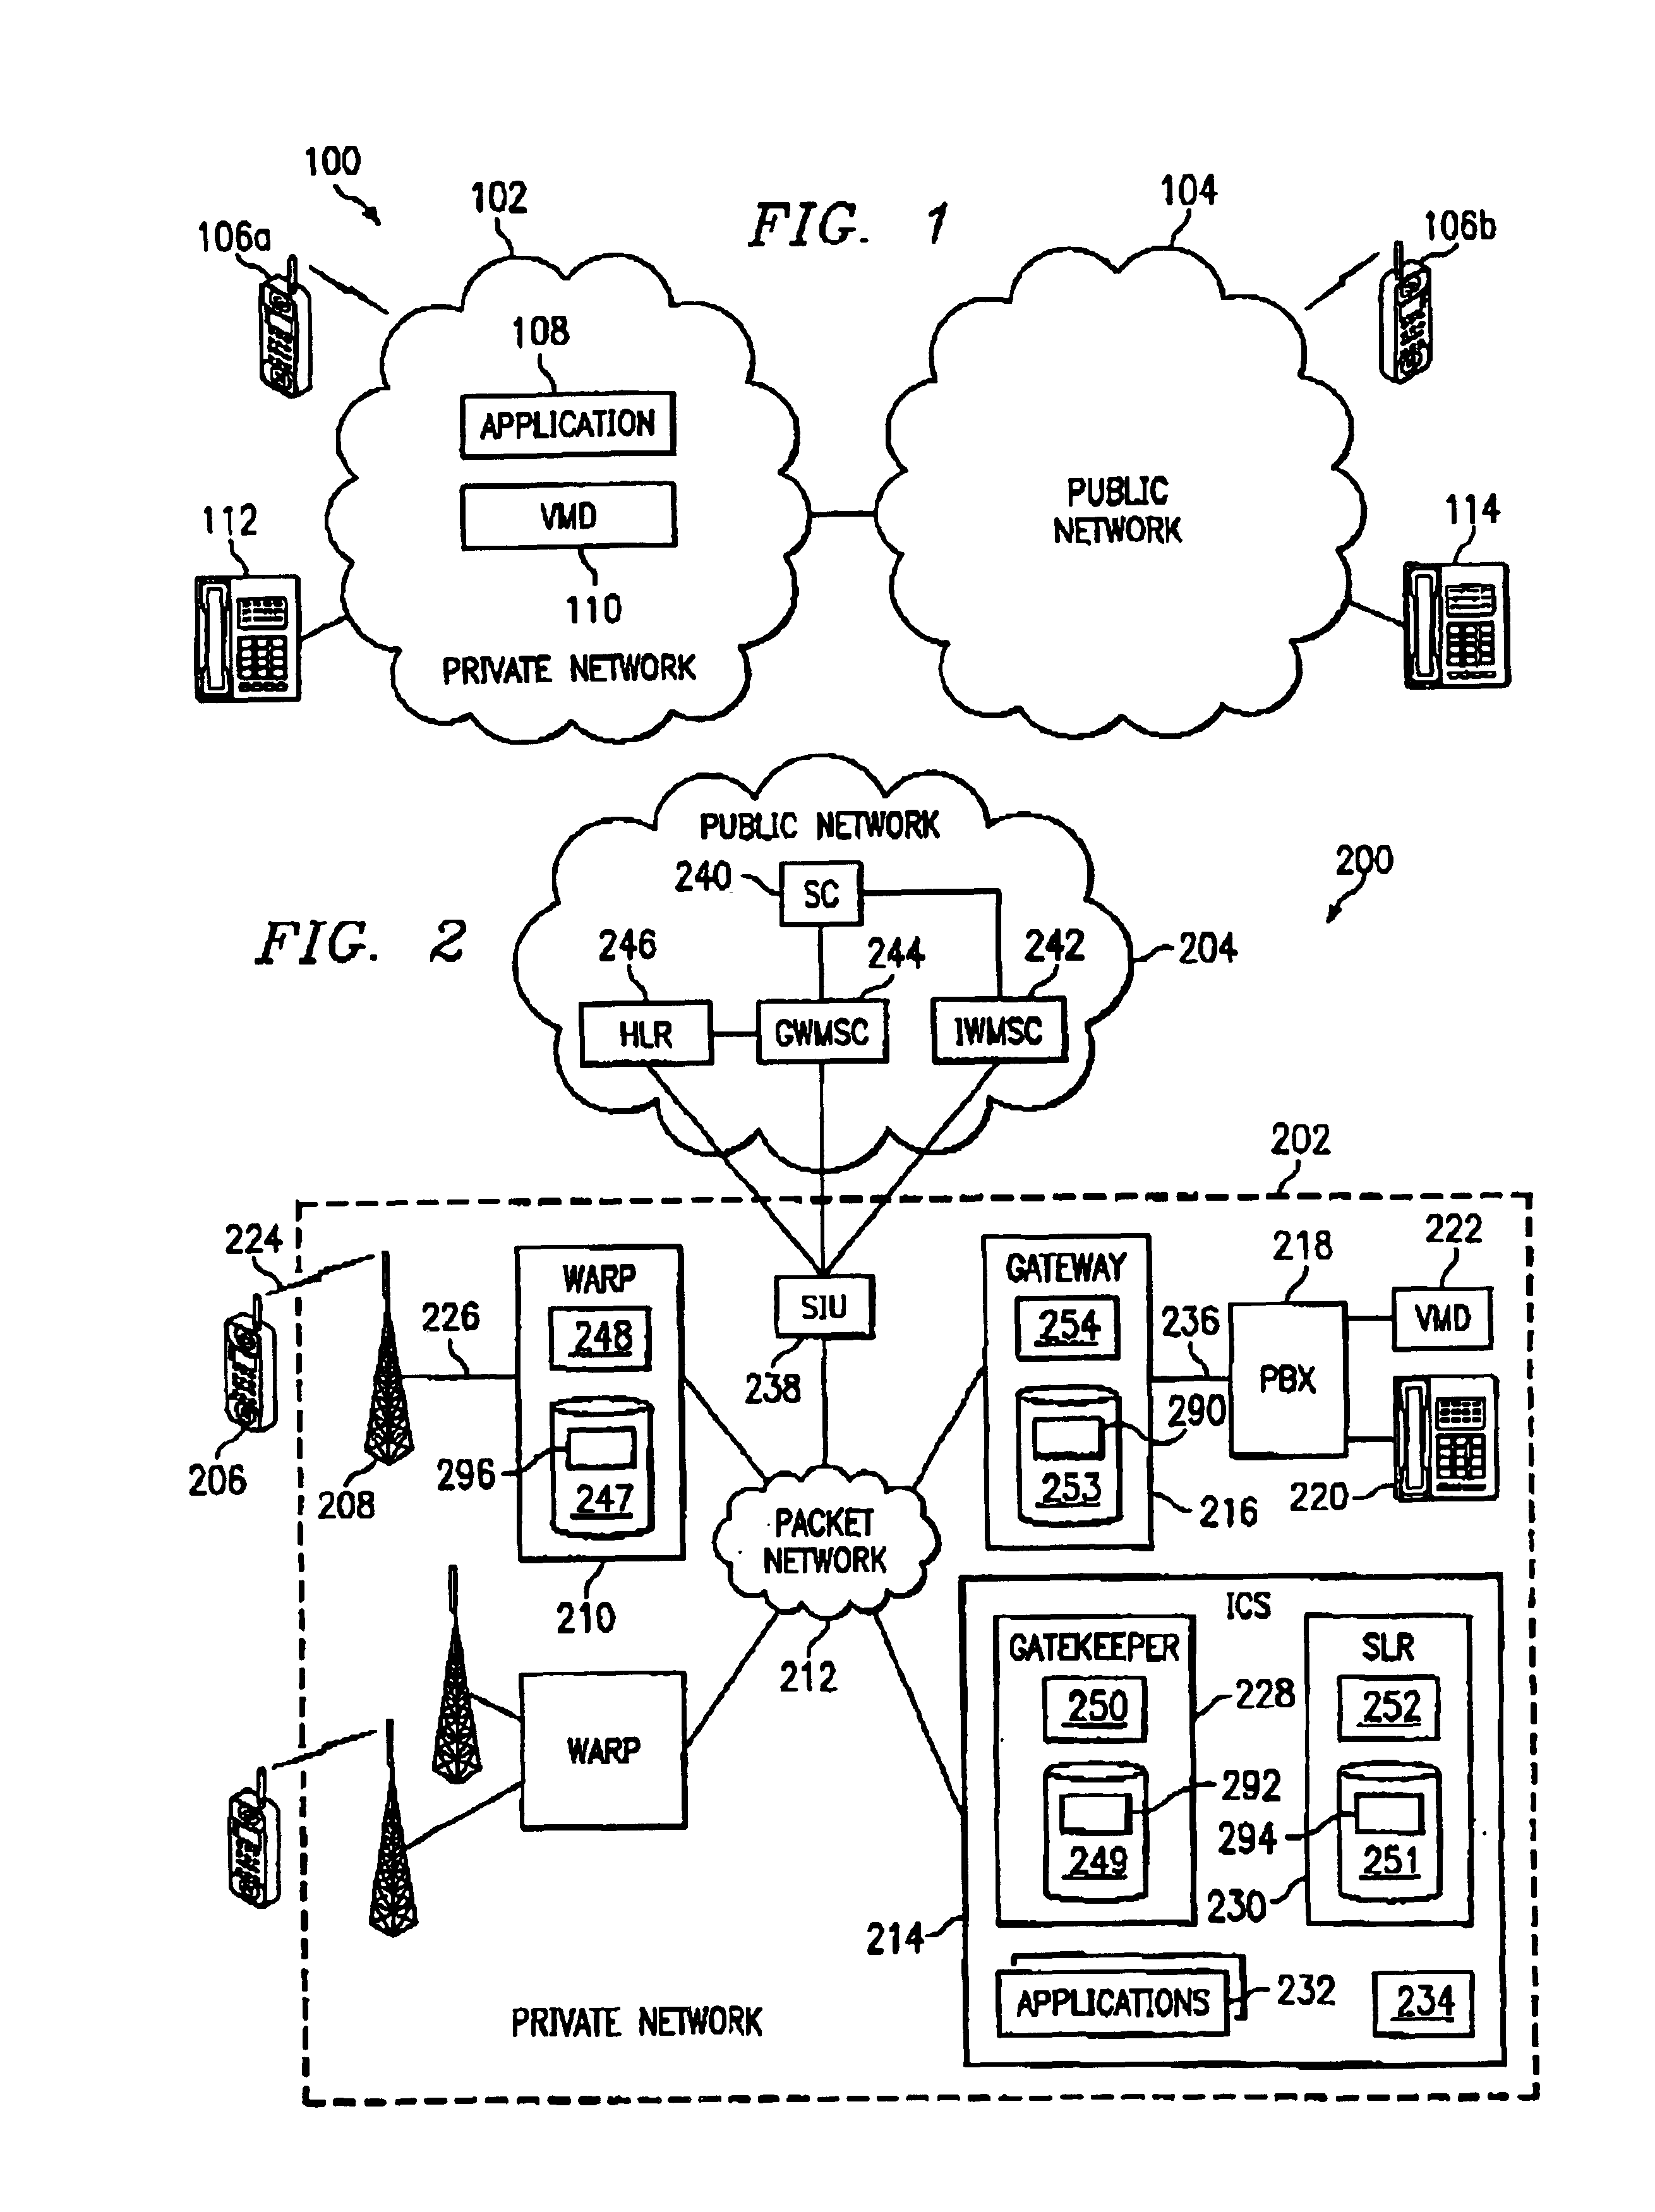 Method and system for providing message services in a communication system